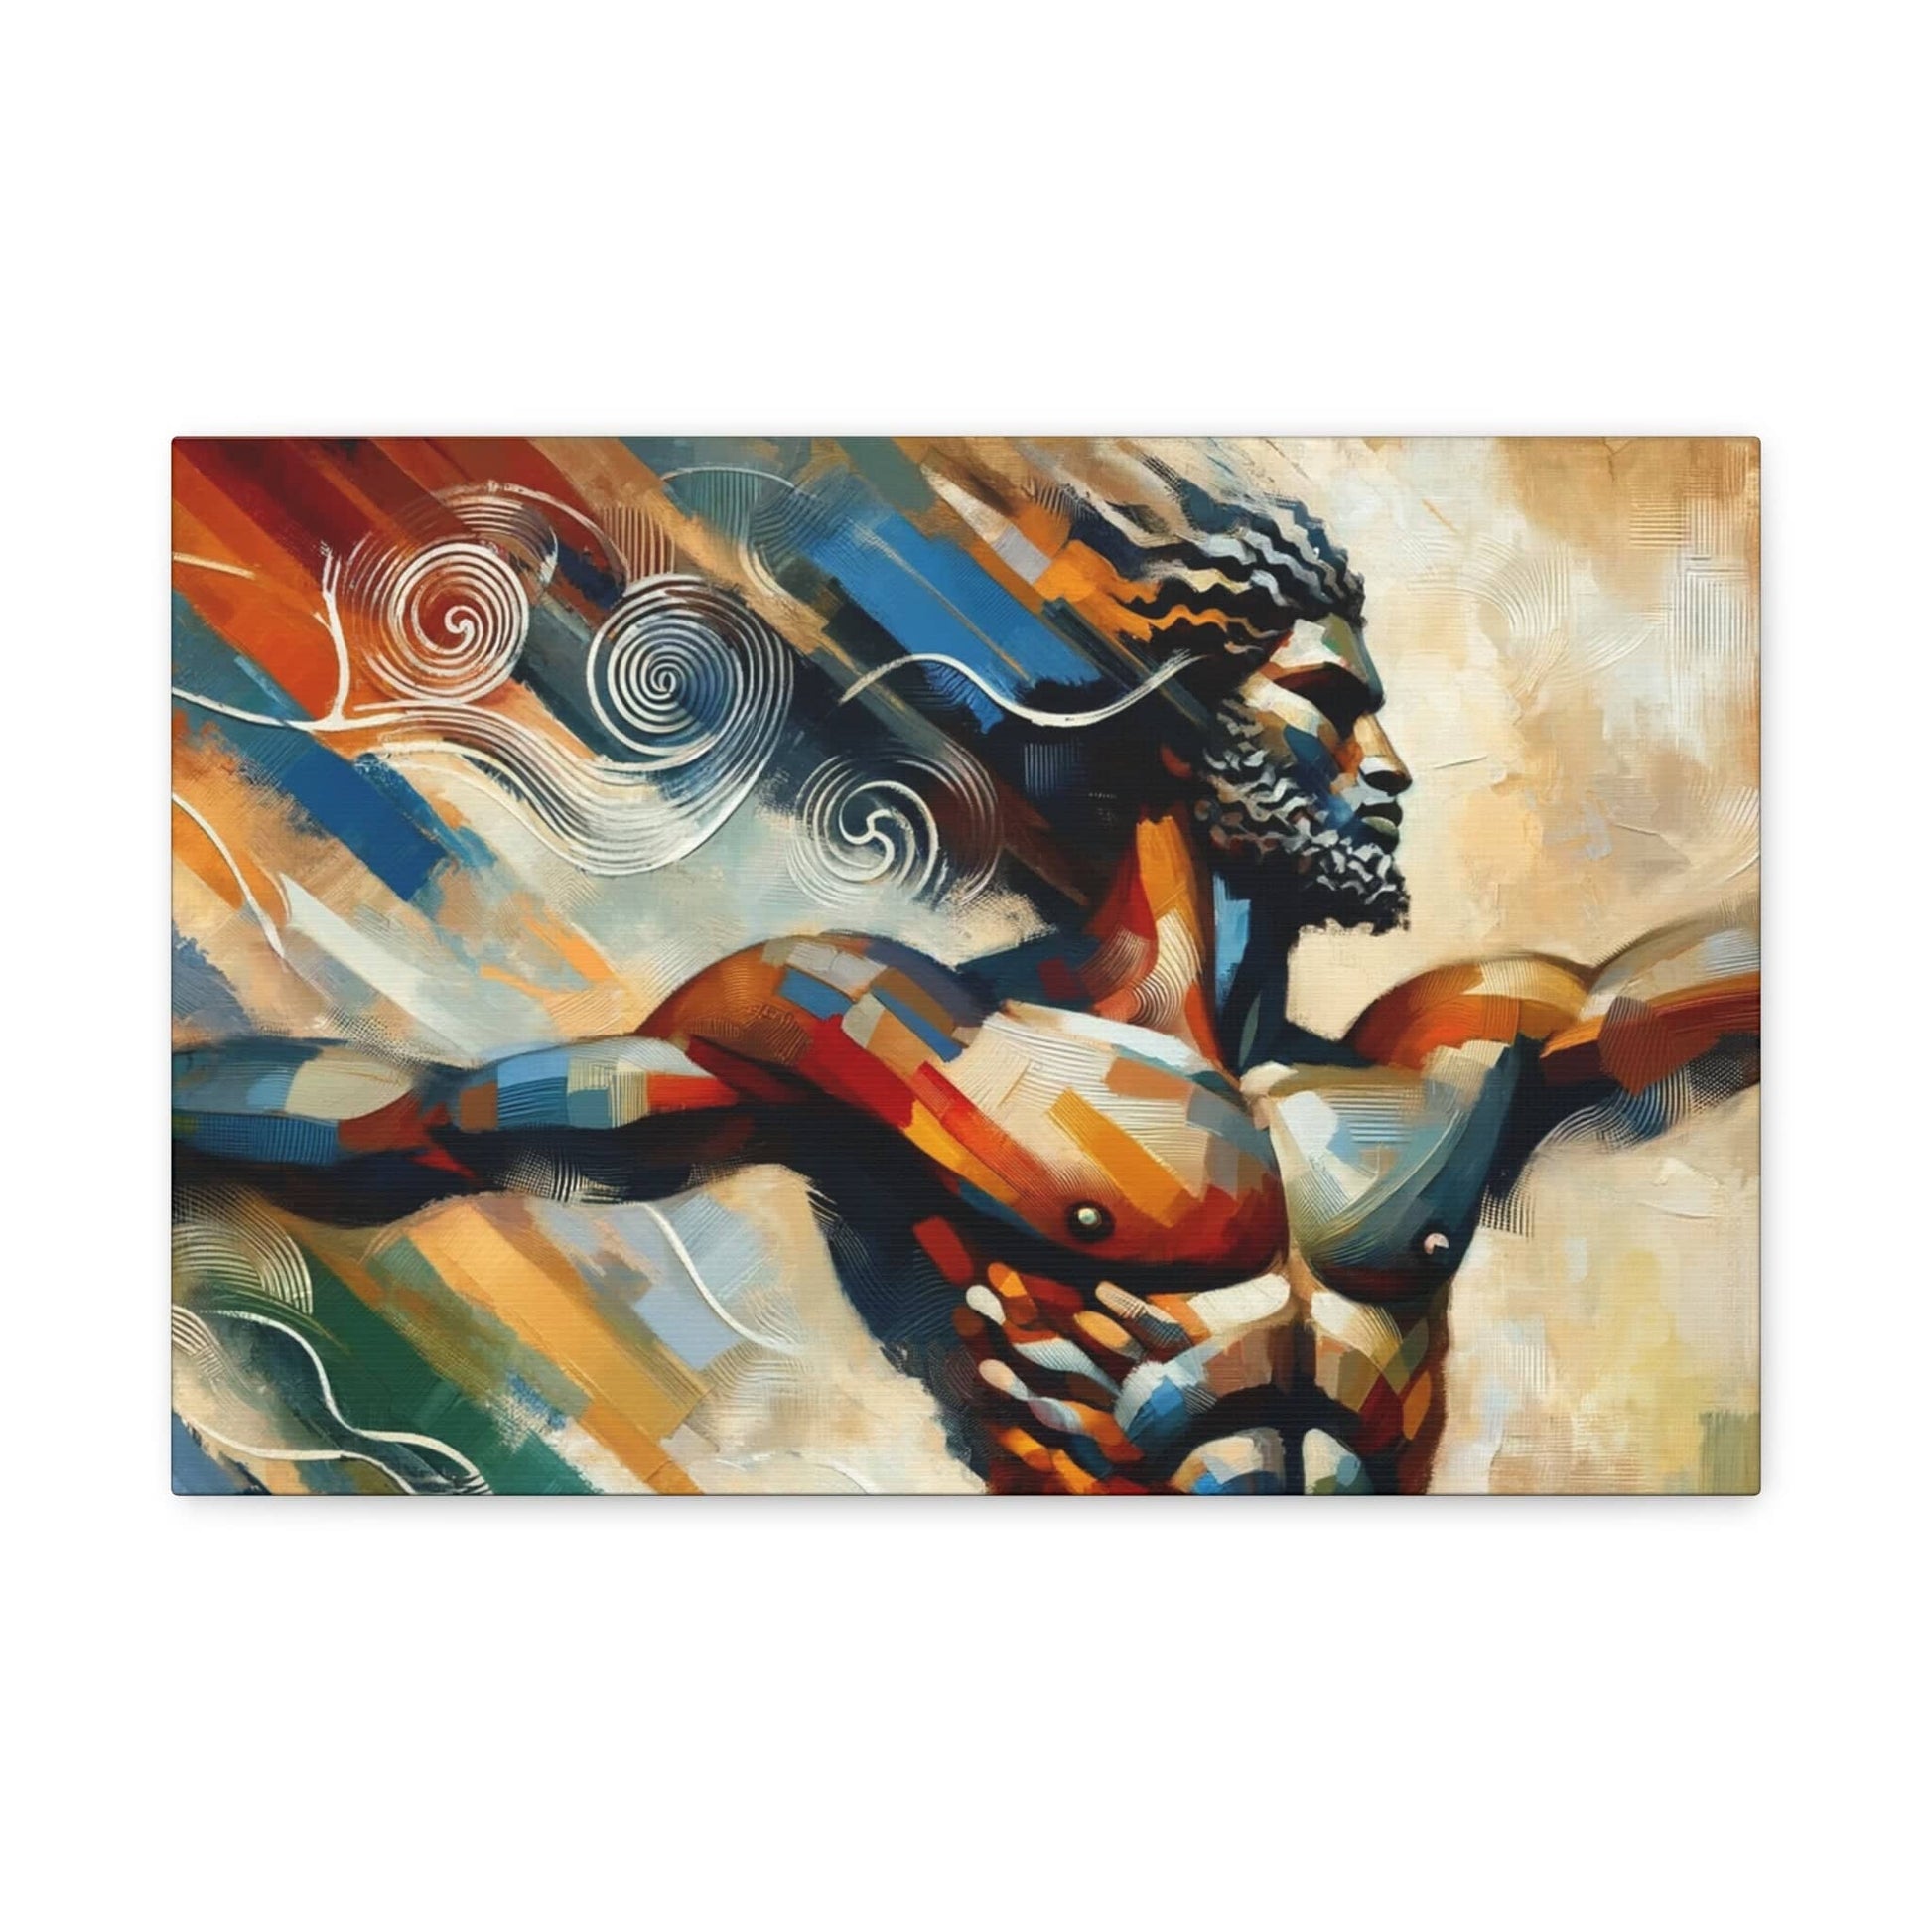 A Printify Whirlwind Warrior Canvas Art portraying a powerful warrior with his arms outstretched in vivid colors.